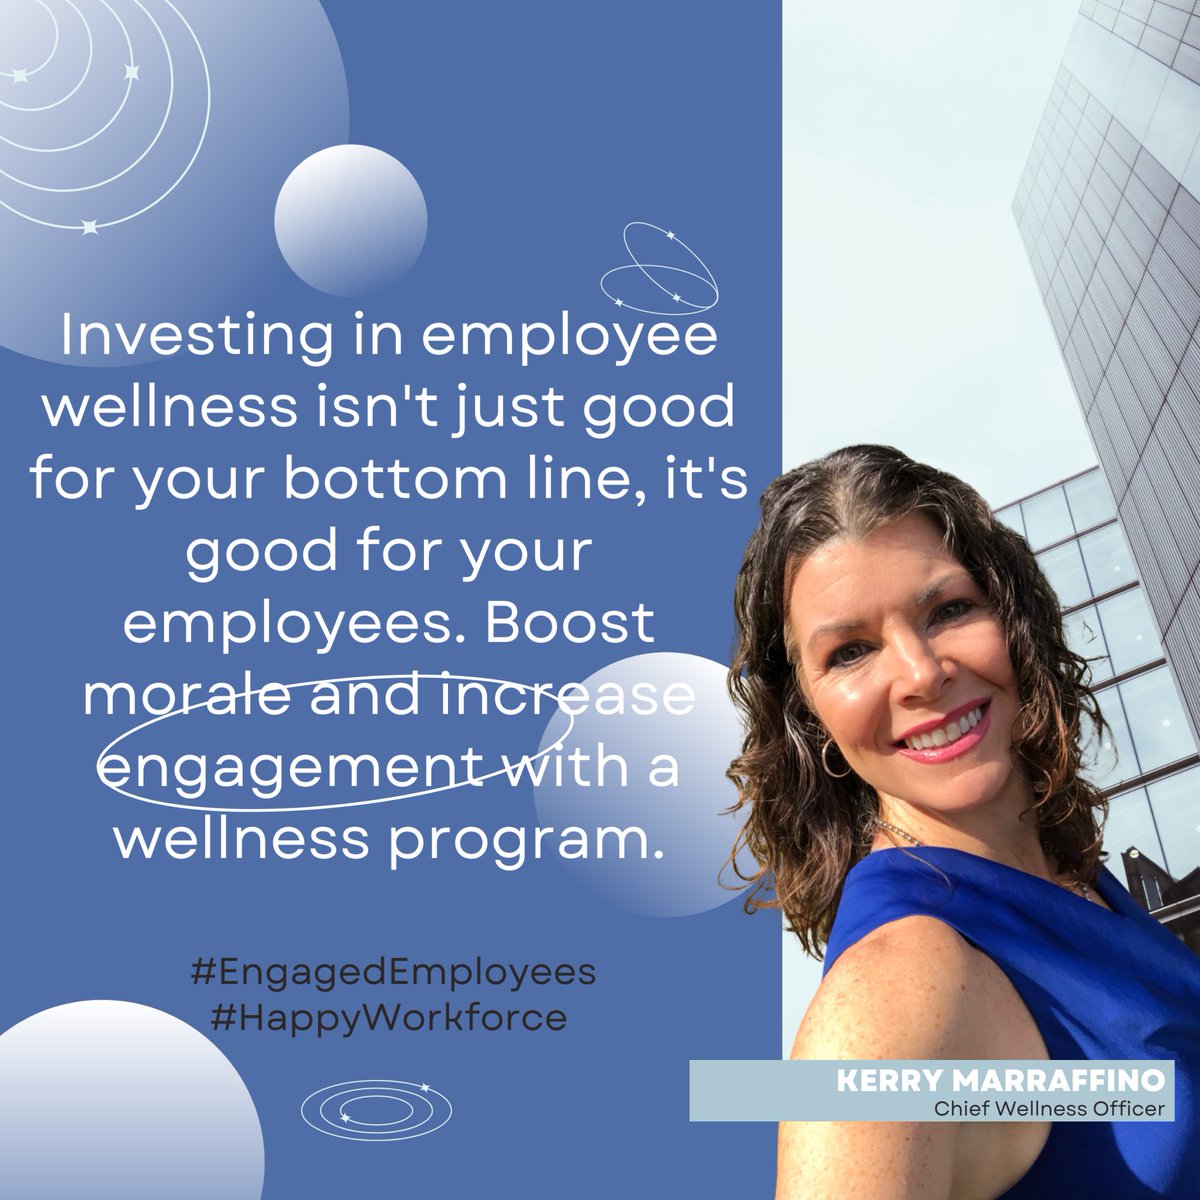 Investing in employee wellness isn't just good for your bottom line, it's good for your employees. Boost morale and increase engagement with a wellness program. 
𝐒𝐜𝐡𝐞𝐝𝐮𝐥𝐞 𝐚 𝐝𝐢𝐬𝐜𝐨𝐯𝐞𝐫𝐲 𝐜𝐚𝐥𝐥 𝐰𝐢𝐭𝐡 𝐦𝐞. 
#EngagedEmployees #HappyWorkforce #EmployeeWellness